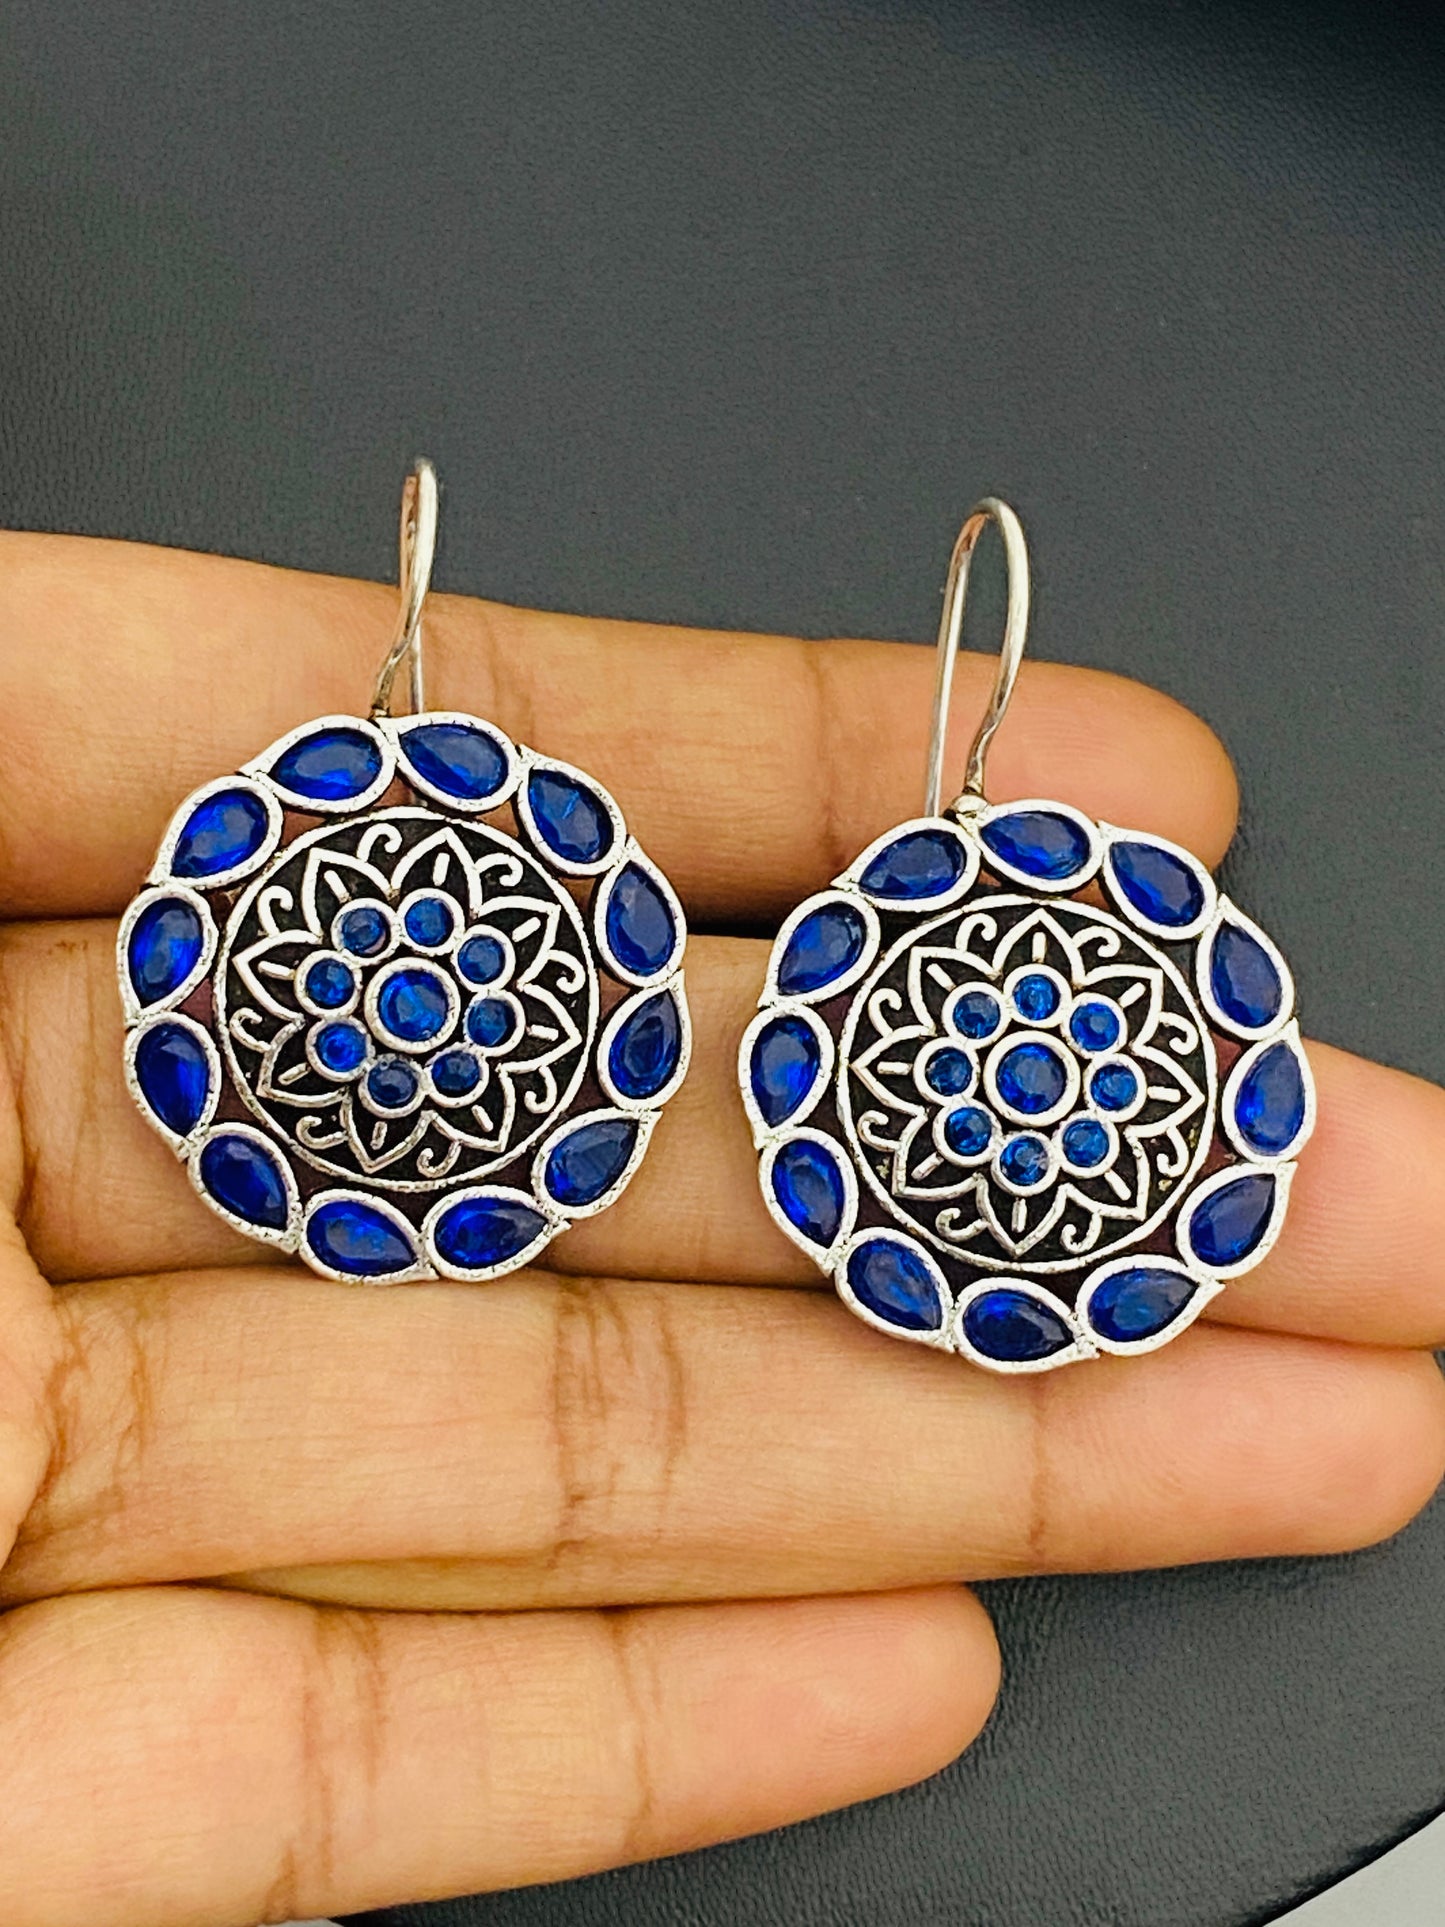 Alluring Blue Color Floral Design Silver Oxidized Earring For Women Near Me